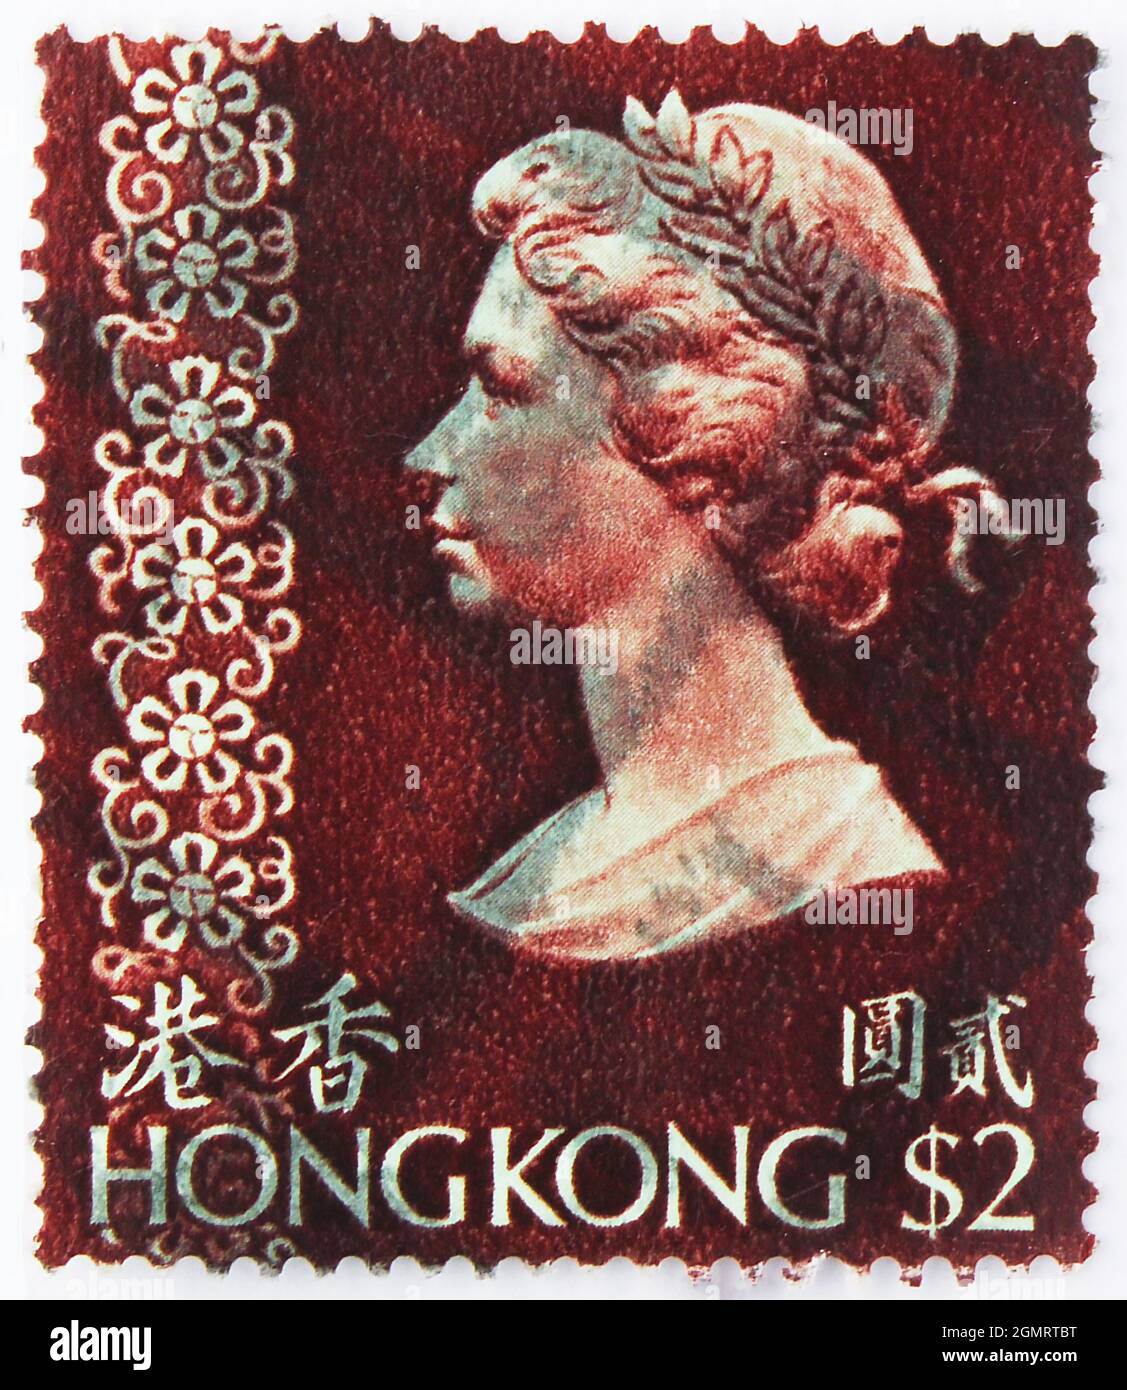 MOSCOW, RUSSIA - NOVEMBER 6, 2019: Postage stamp printed in Hong Kong shows Queen Elisabeth II, 1962-1972 serie, circa 1976 Stock Photo